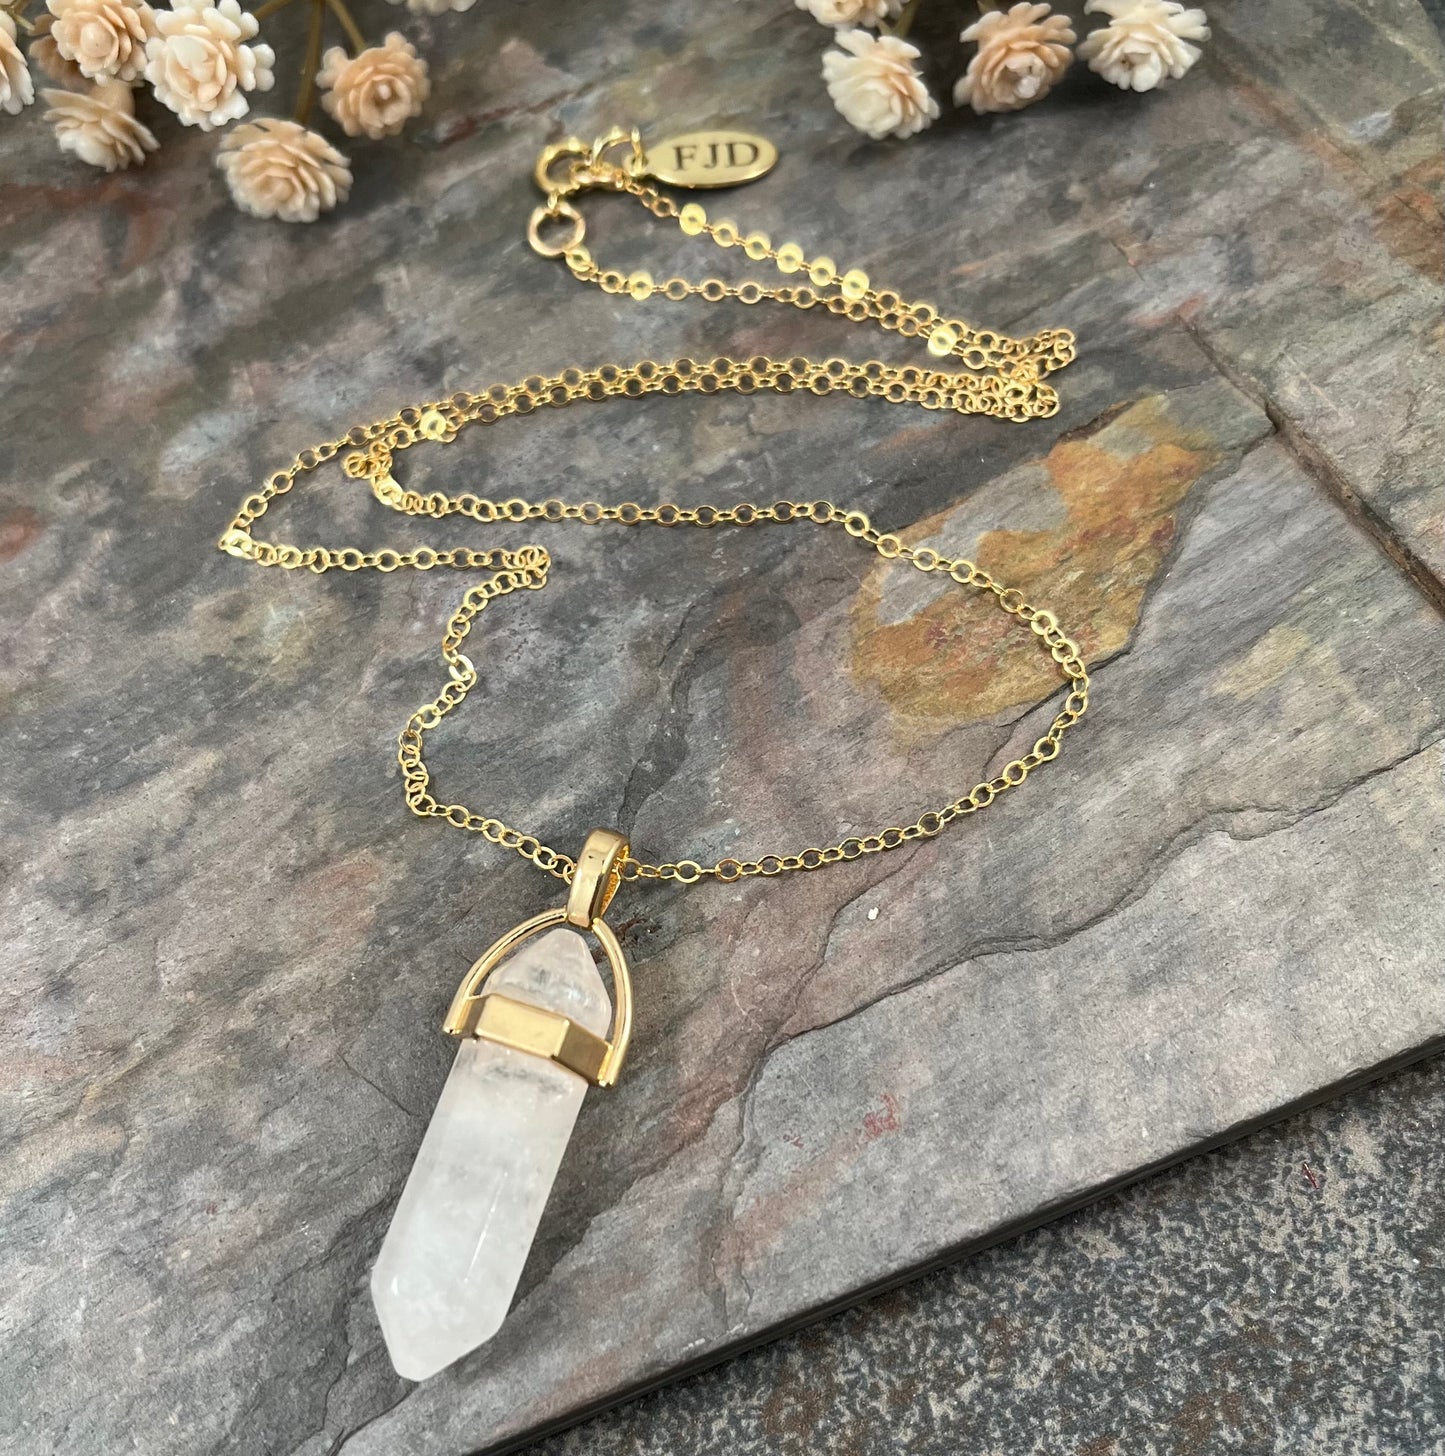 Just Breathe - Clear Quartz and Gold Filled Necklace